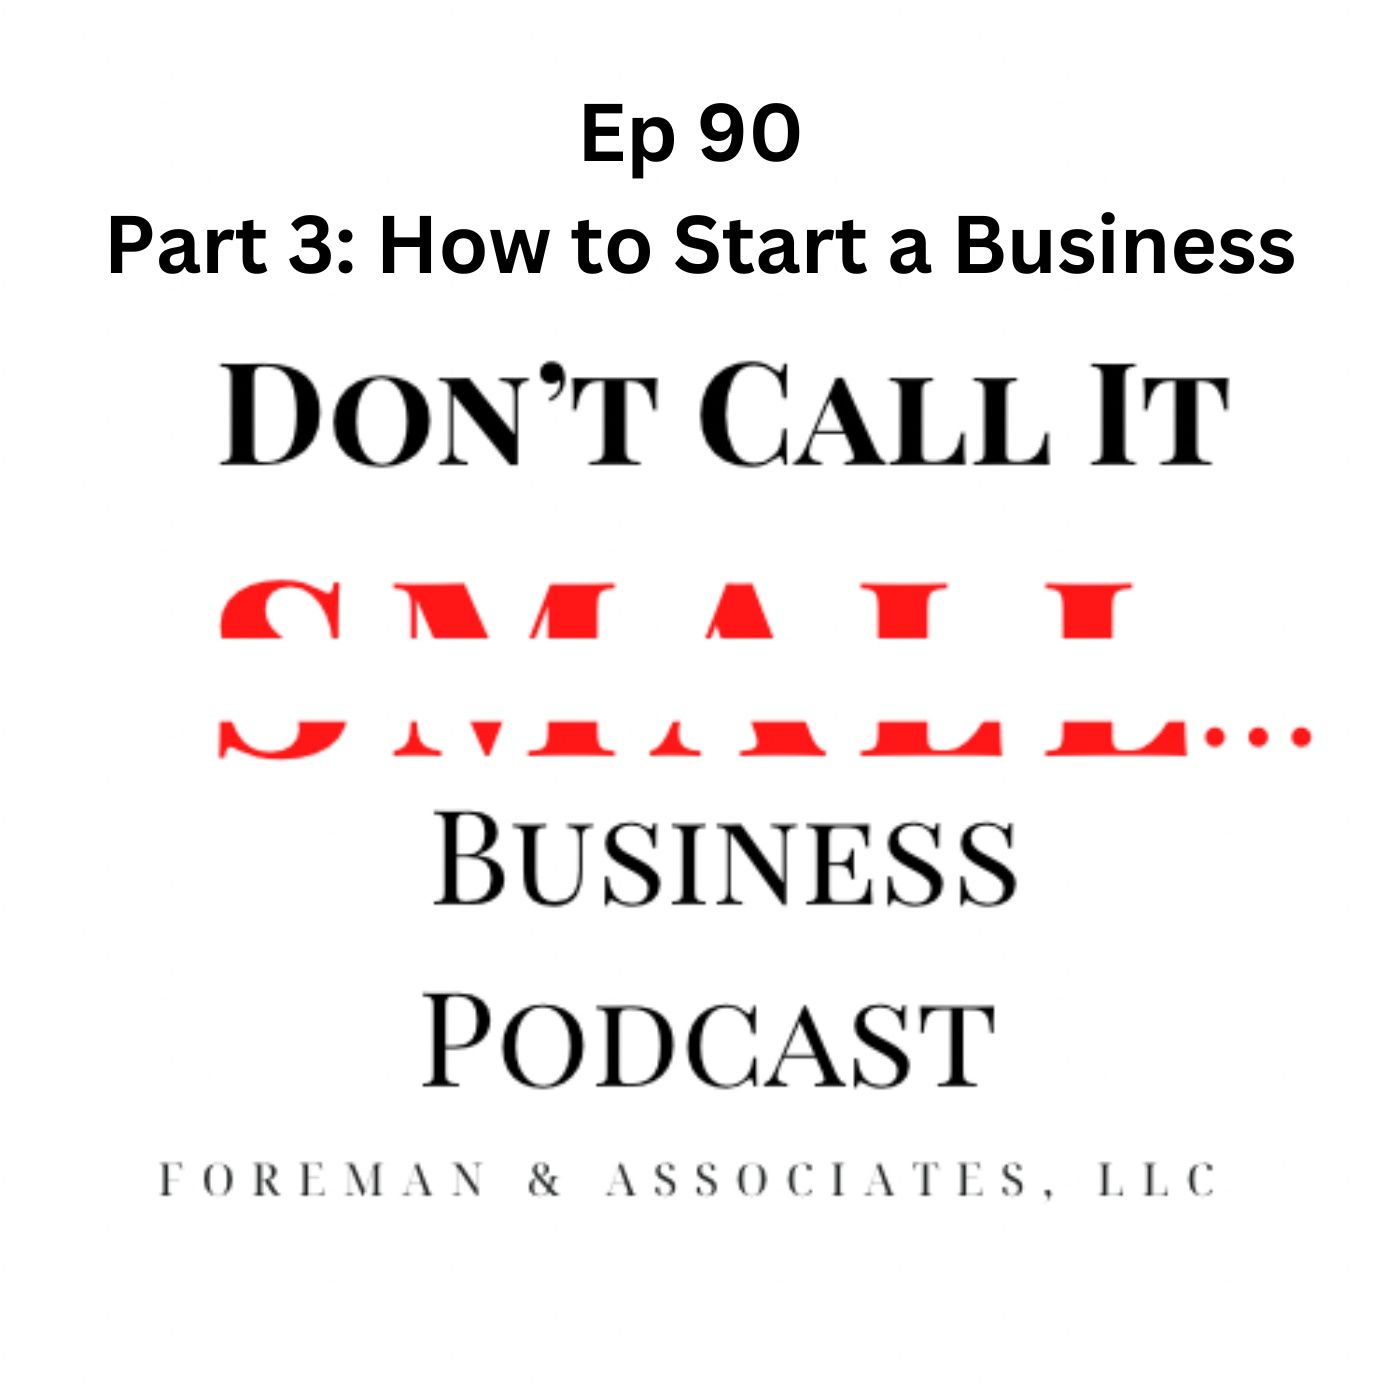 Ep 90: Part 3 — How to Start a Business